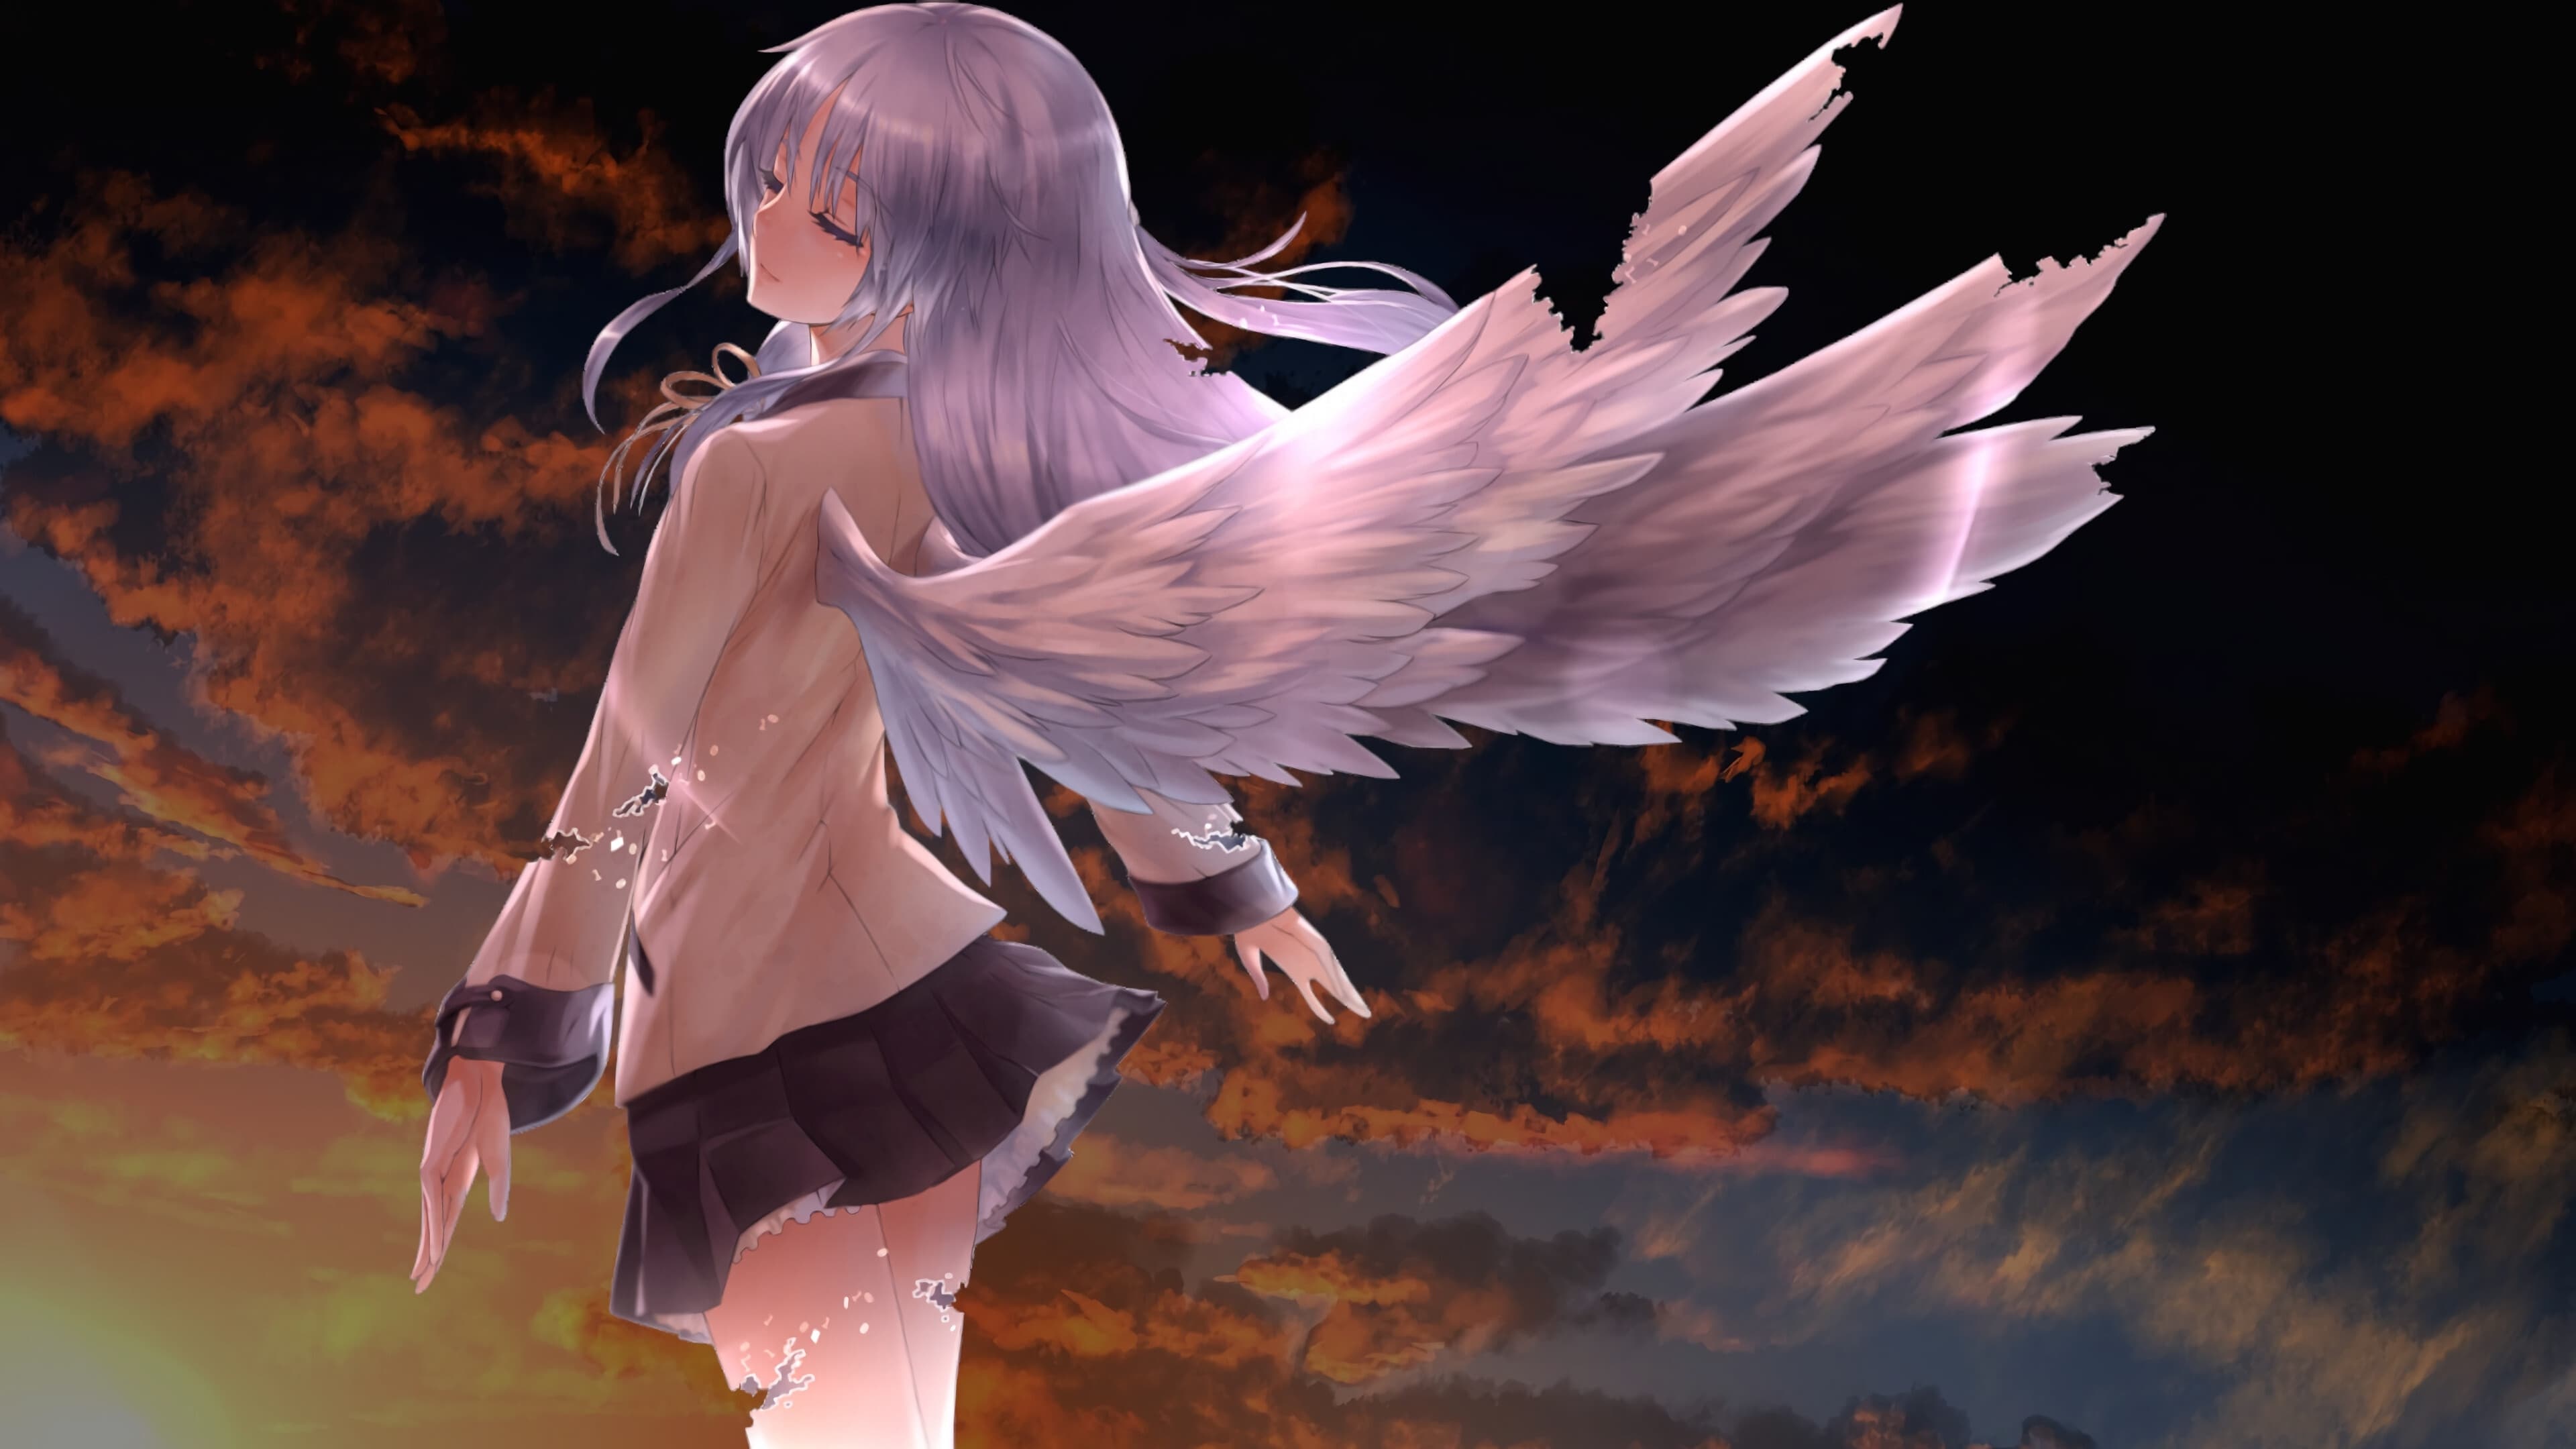 Angel Beats! (Anime): Girl with white wings, The main target of Yuri and by extension, the SSS. 3840x2160 4K Wallpaper.